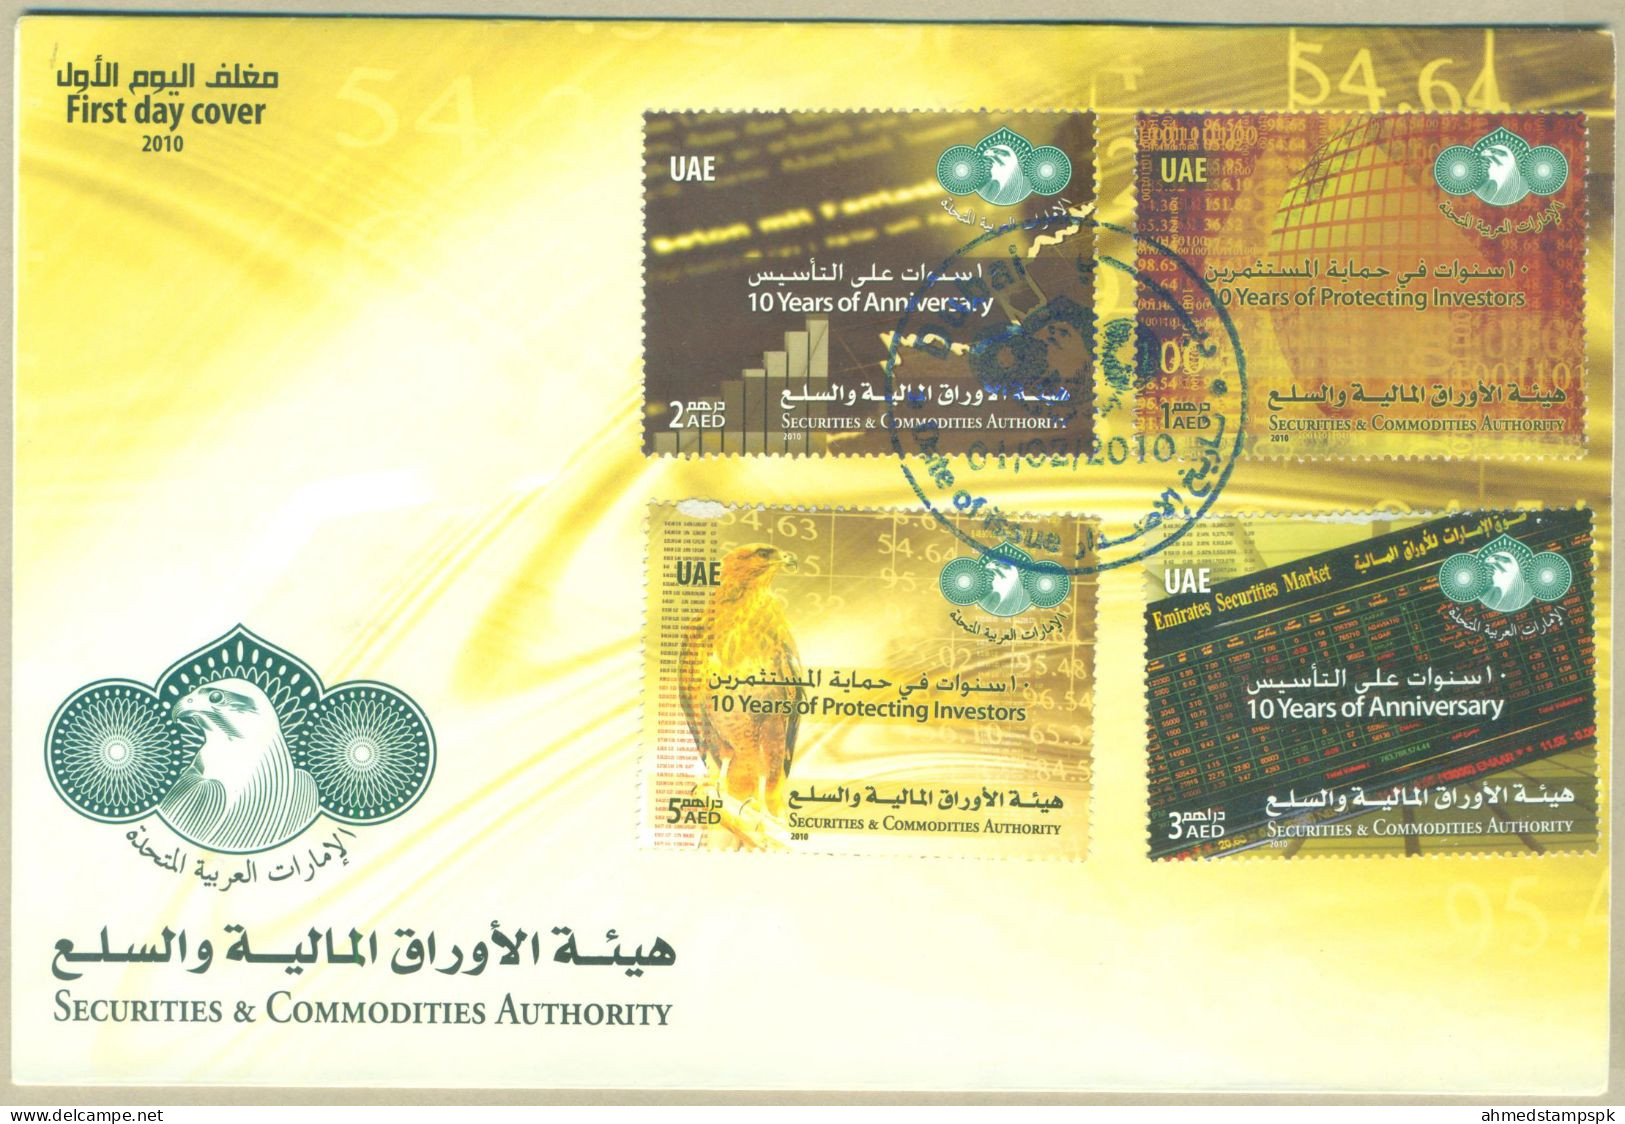 UAE UNITED ARAB EMIRATES FDC FIRST DAY COVER 2010 MNH SECURITIES AND COMMODITIES AUTHORITY - Emirats Arabes Unis (Général)